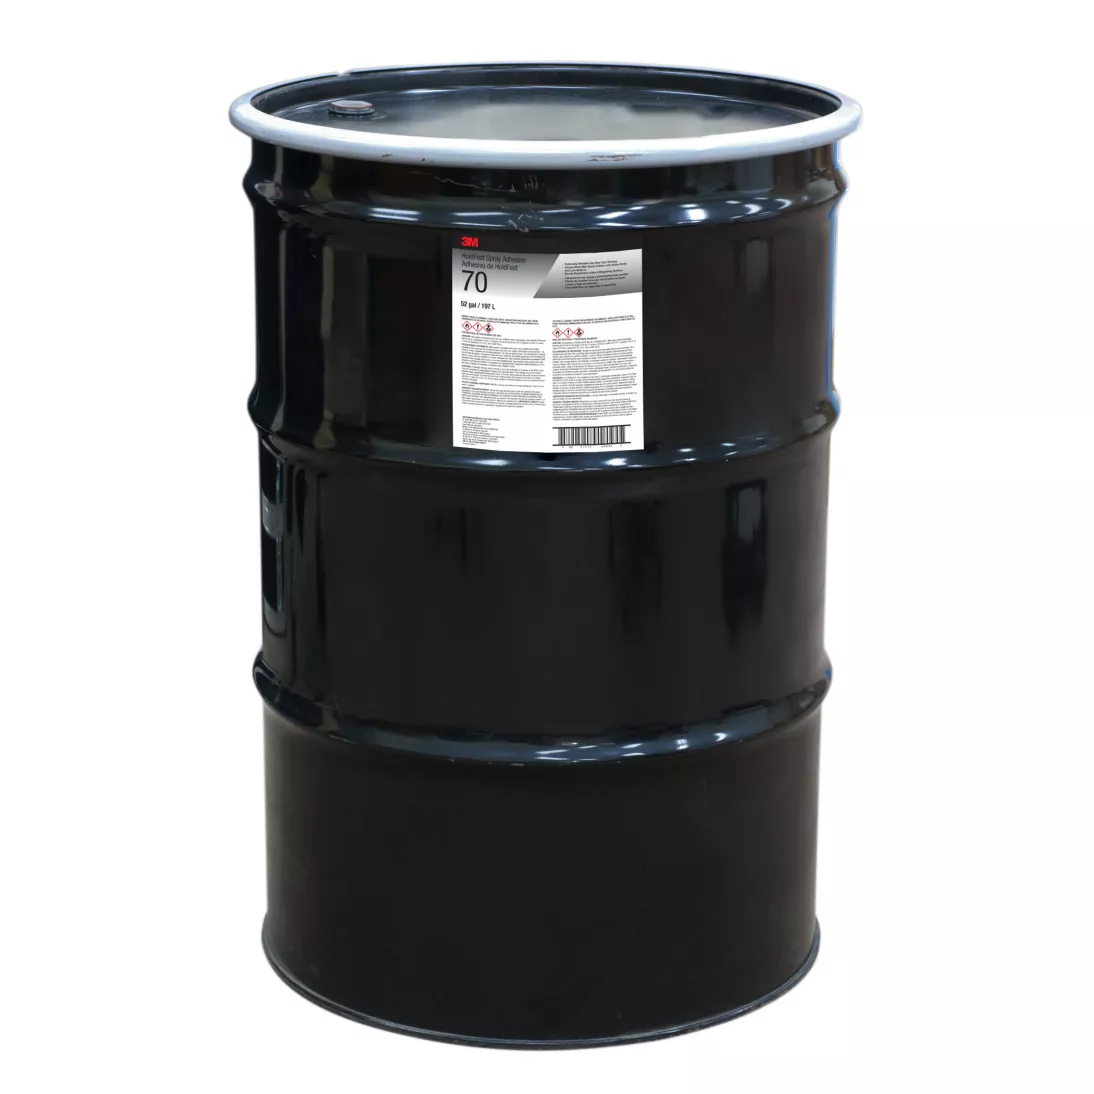 3M™ HoldFast 70 Adhesive, Clear, 55 Gallon Metal Closed Head Drum (52
Gallon Net)